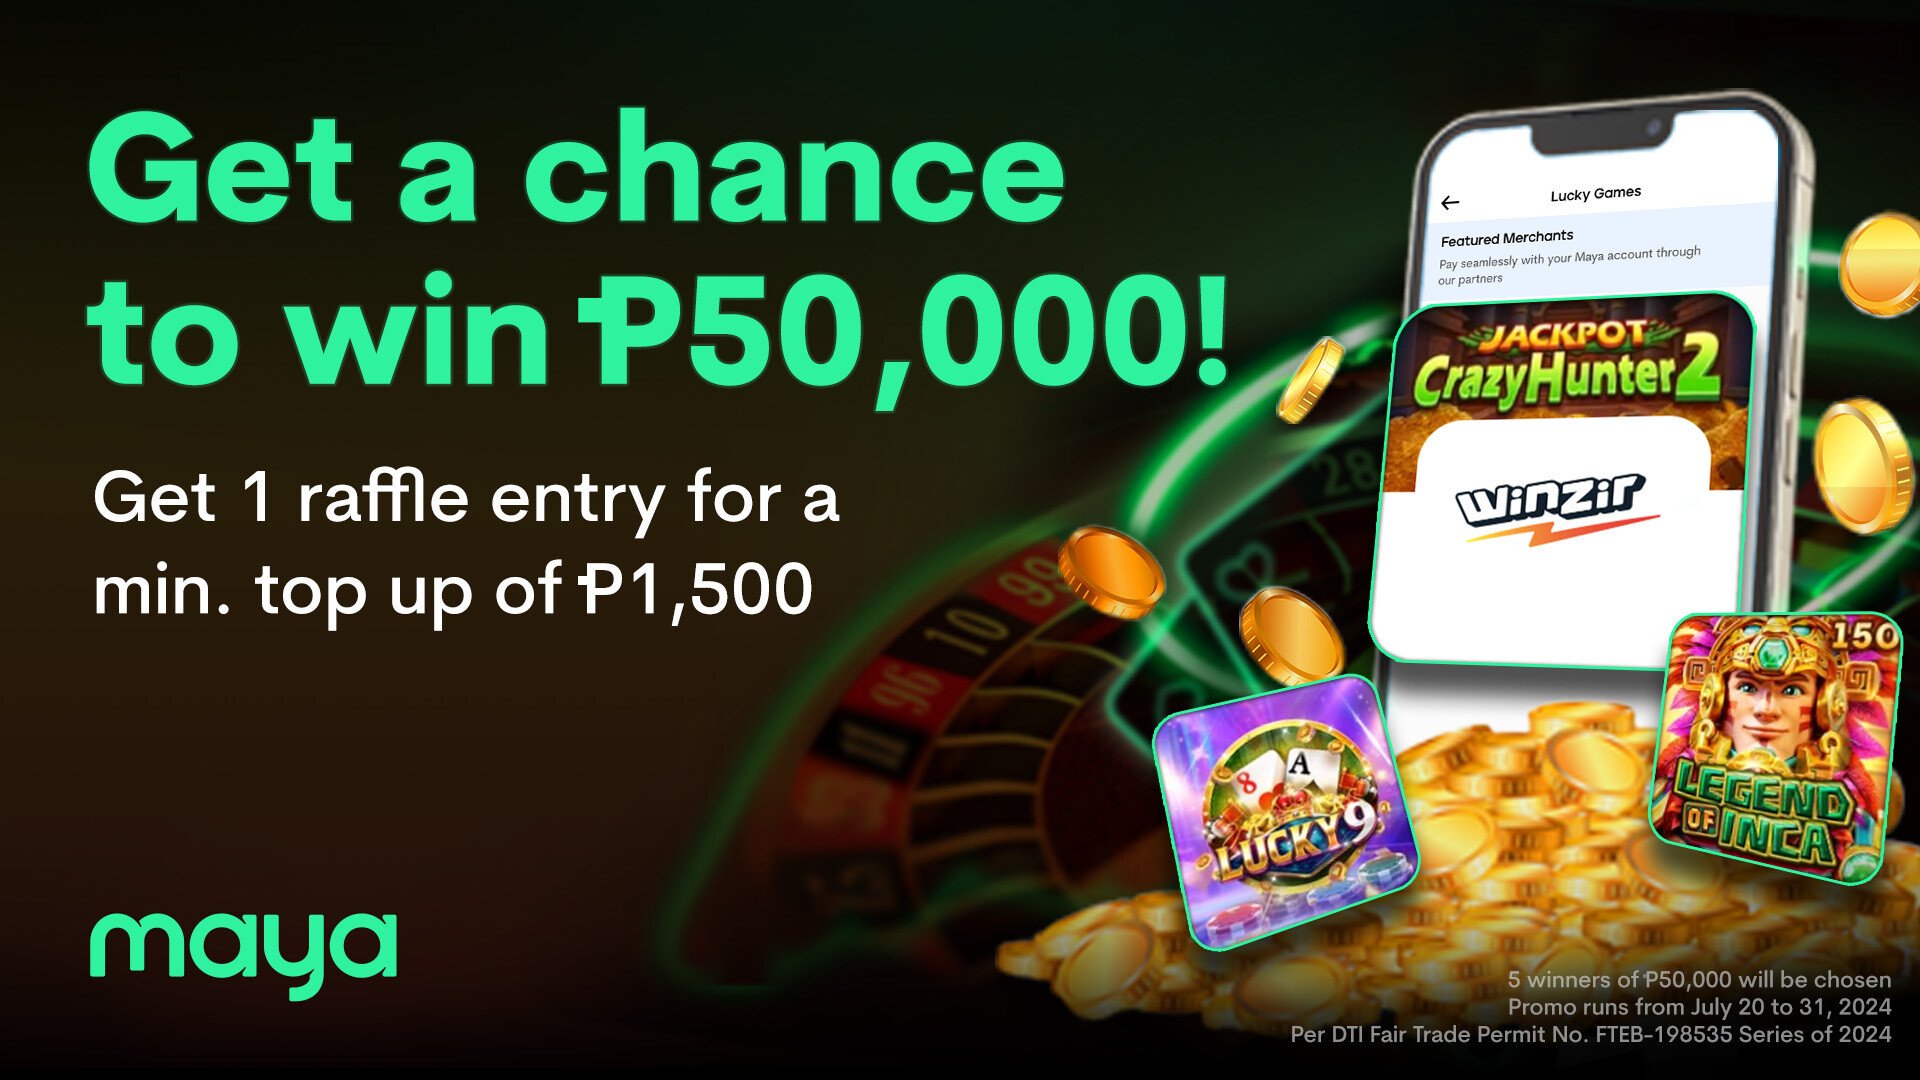 Get a chance to win ₱50,000 at WinZir!